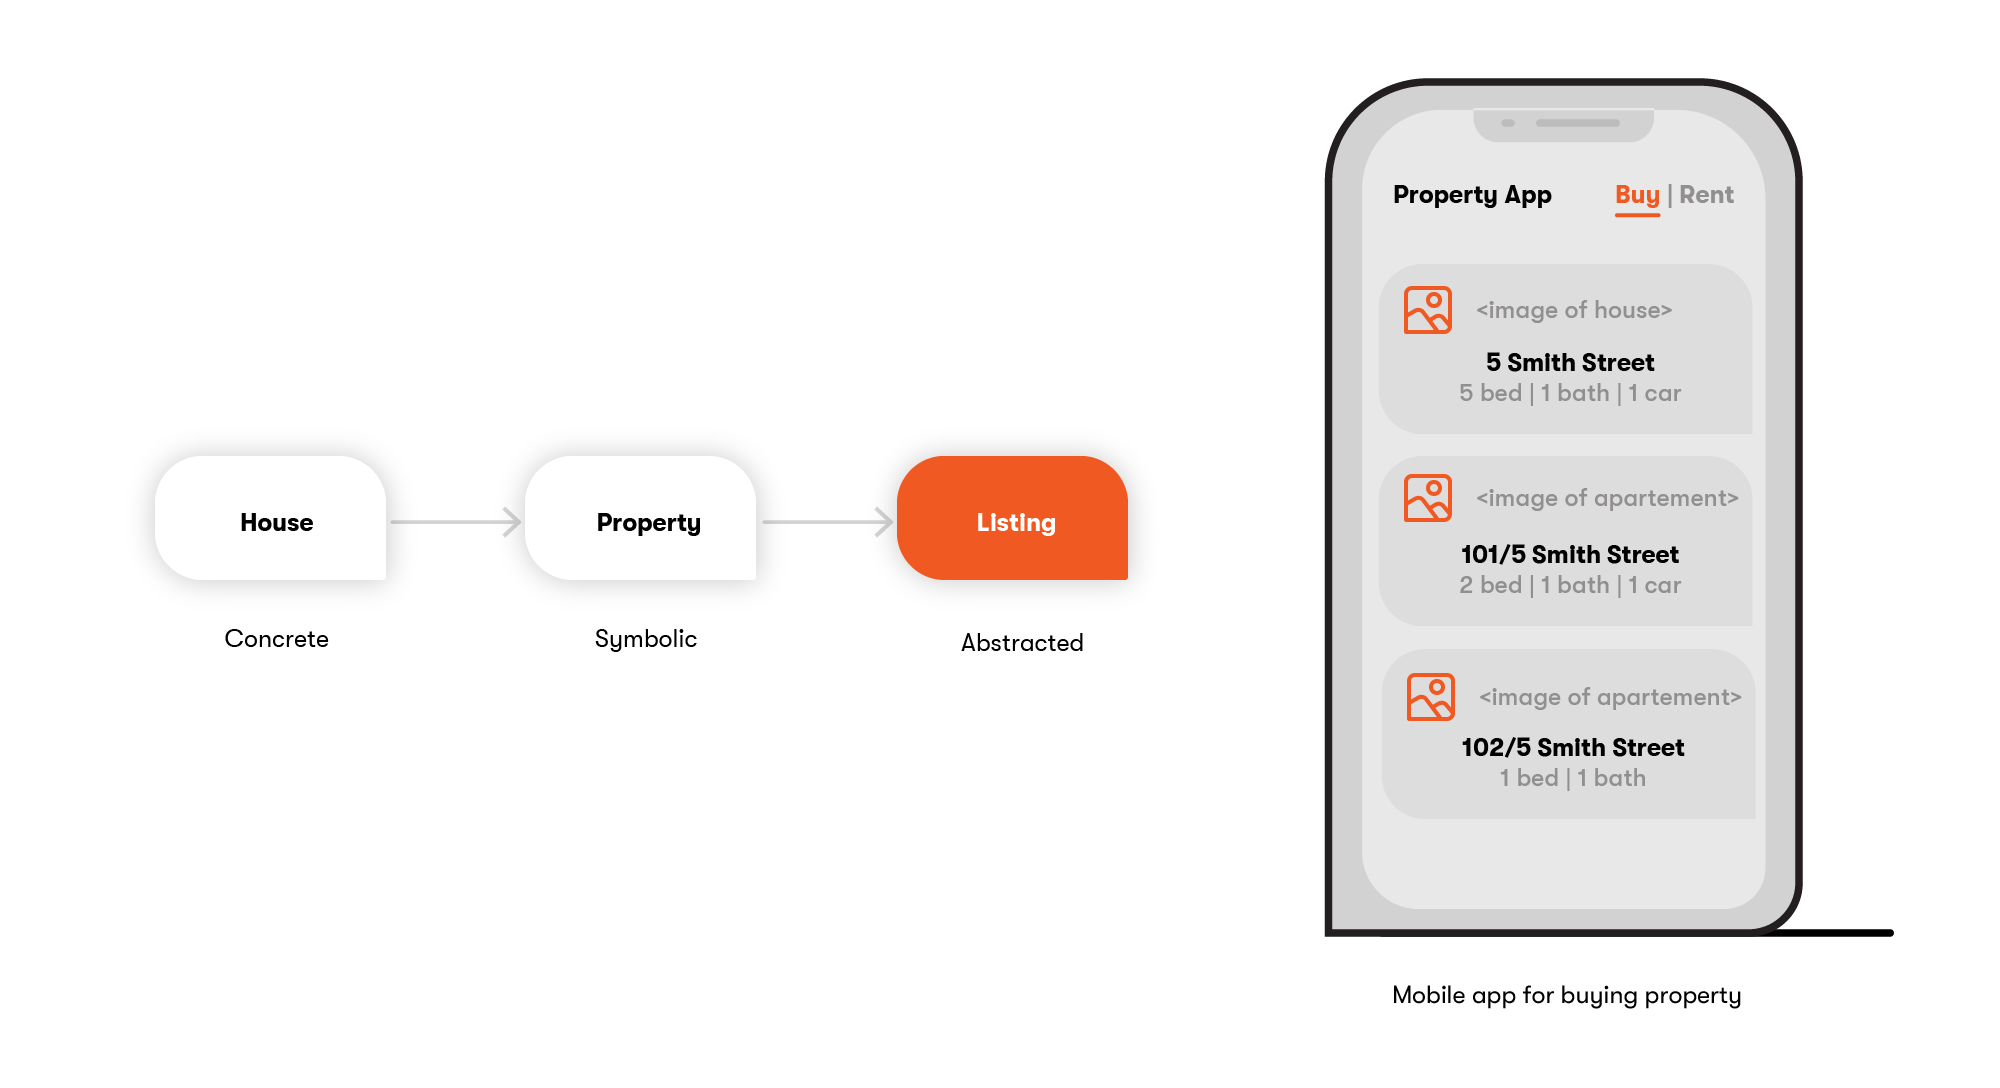 Figure 1: Mobile app for buying property